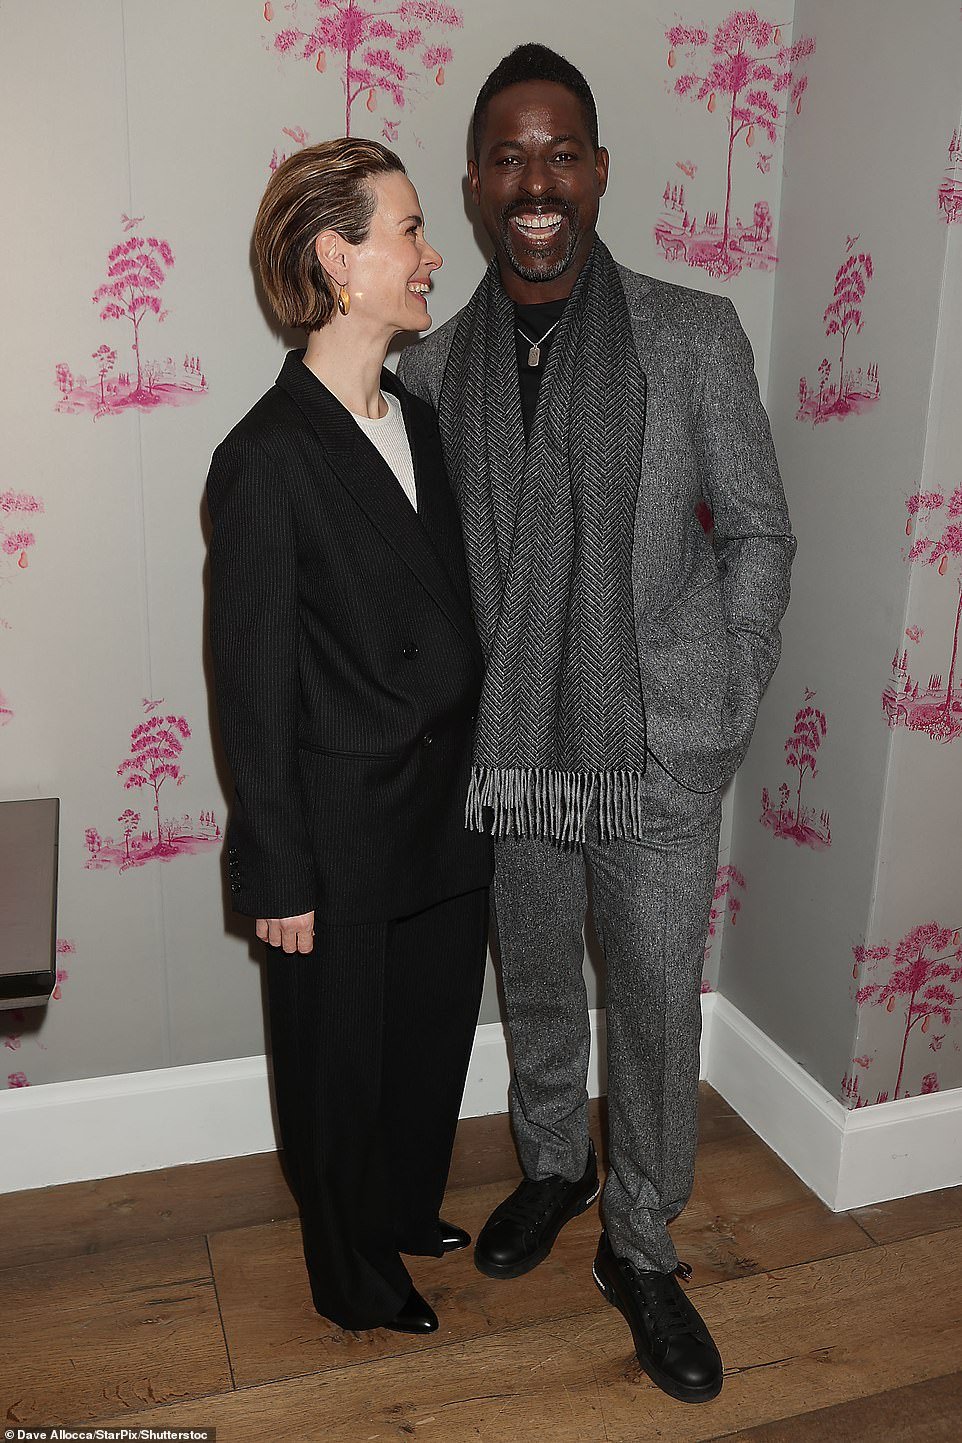 Sarah Paulson reunited with her former co-star Sterling K. Brown to host a special screening of his film American Fiction on Monday at the Crosby Street Hotel in Manhattan's SoHo neighborhood